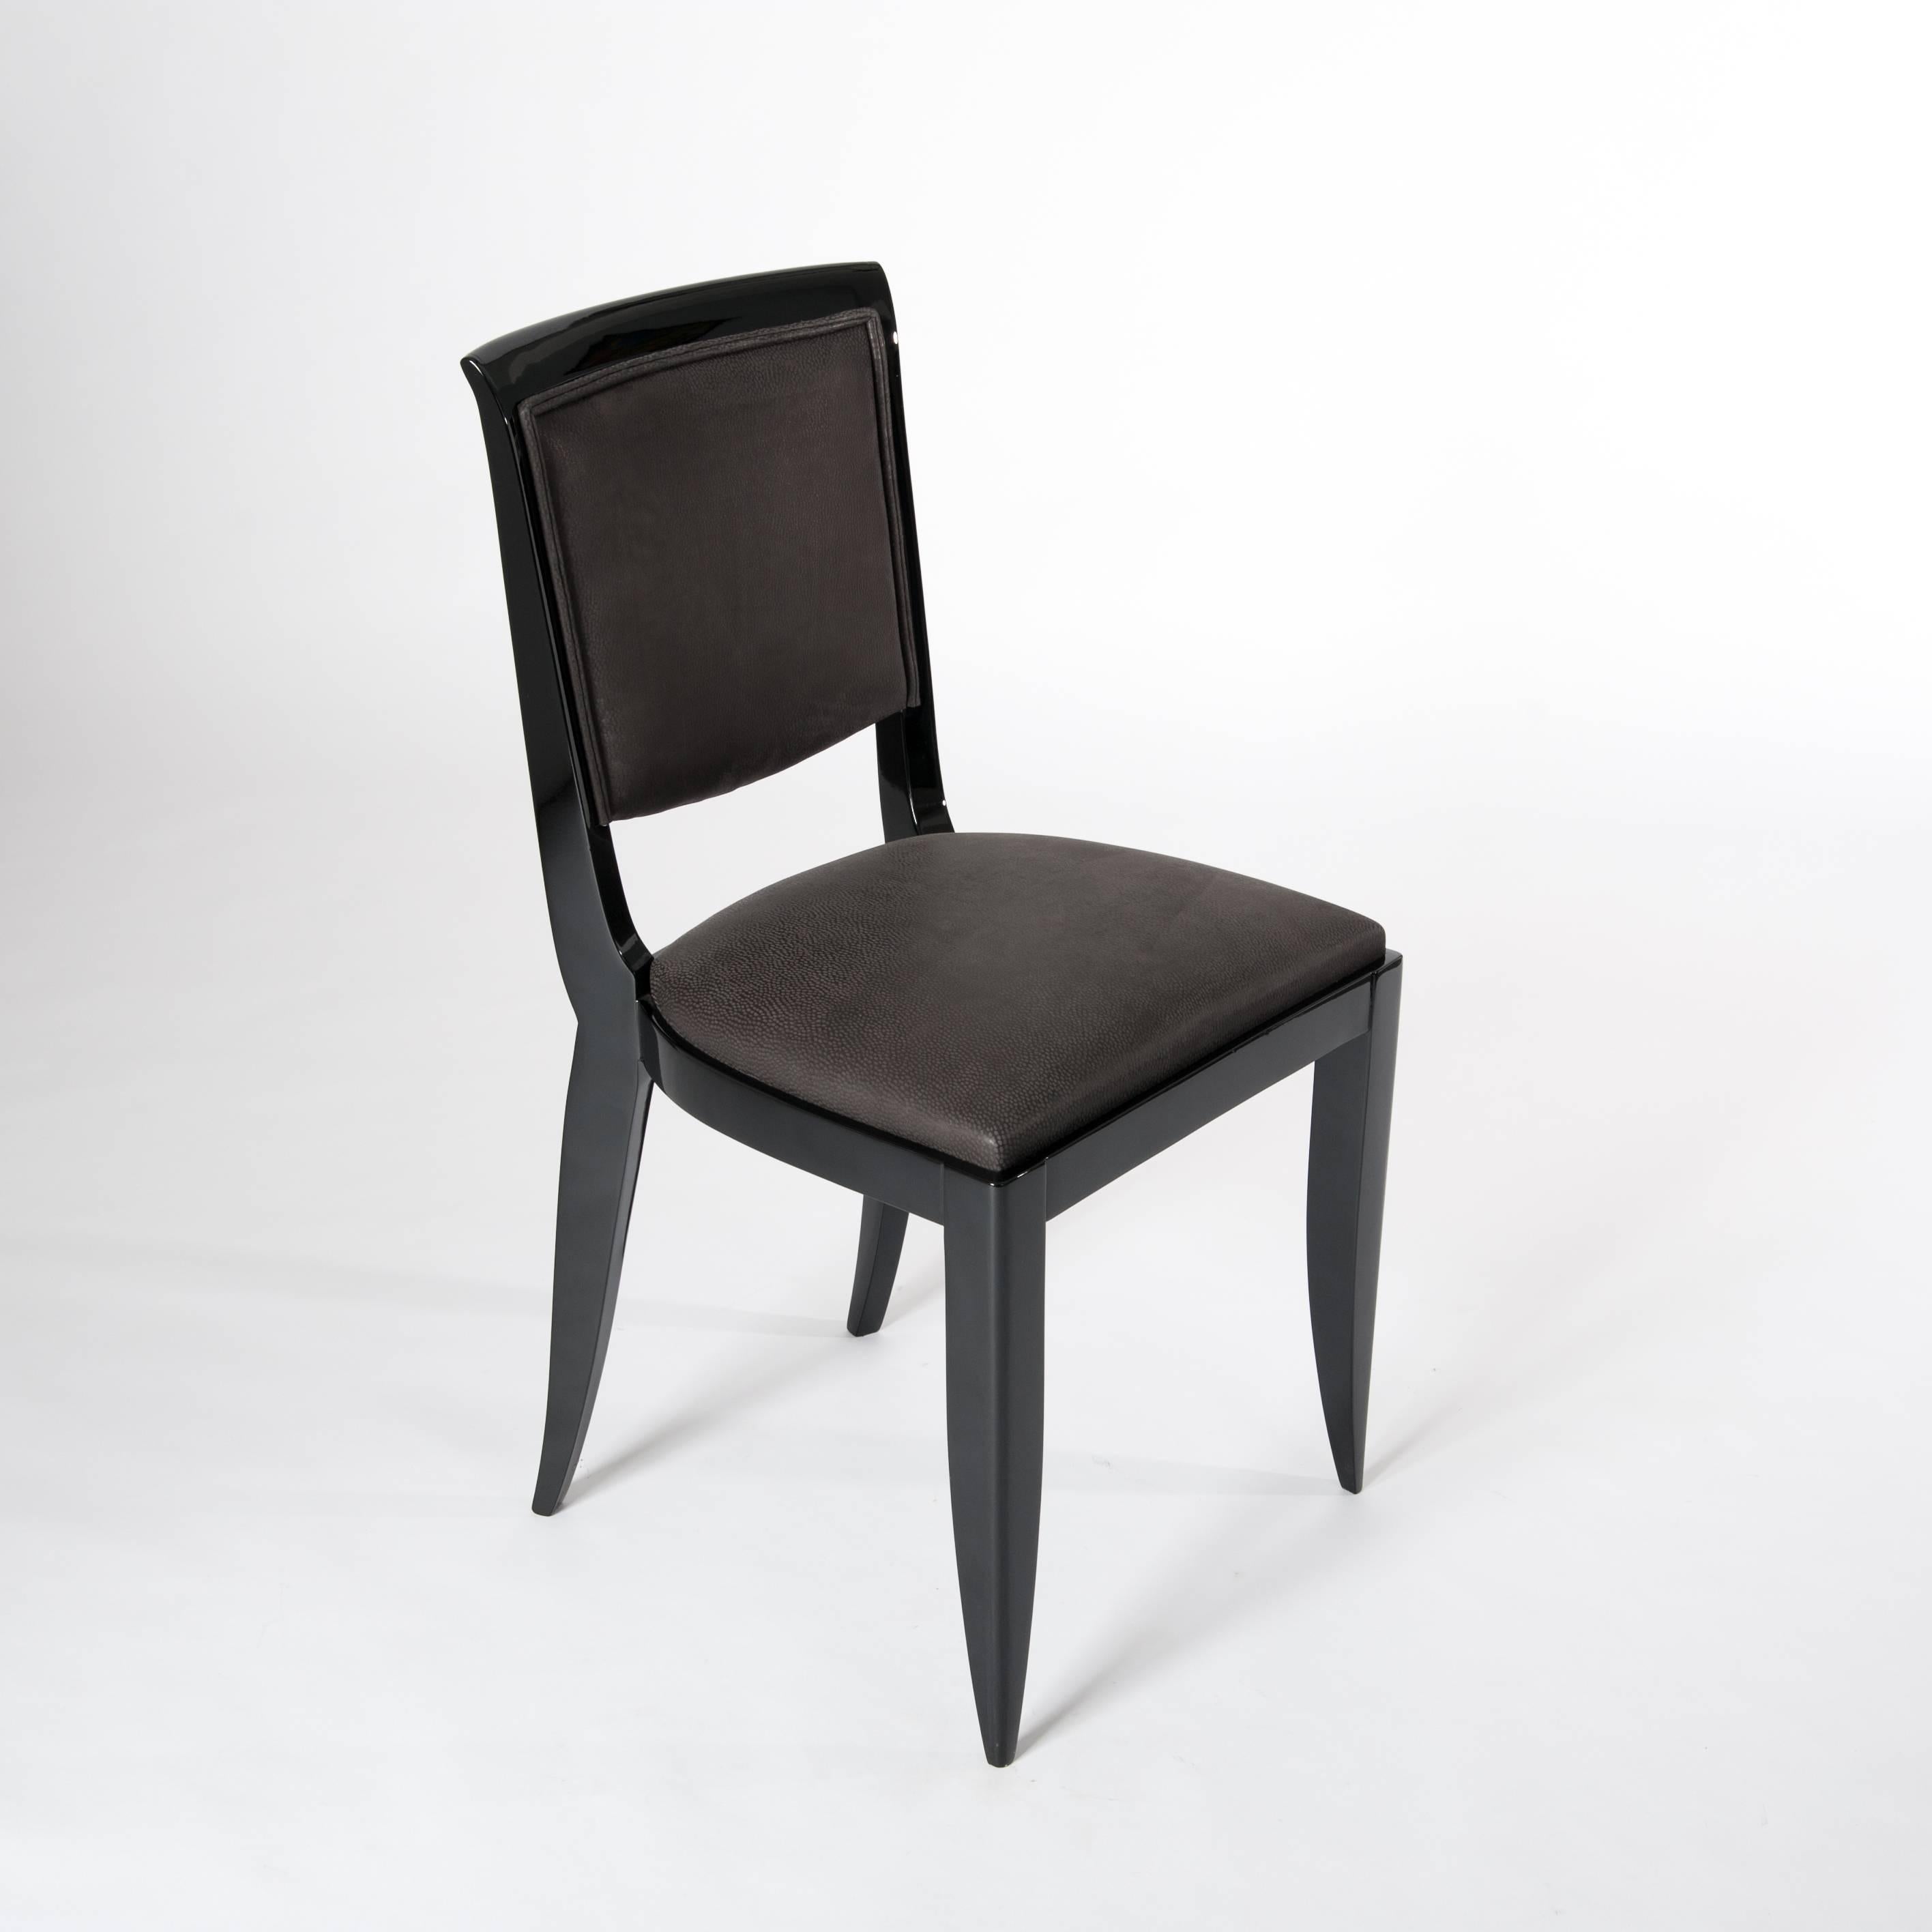 Early 20th Century Six Black French Art Deco Dining Room Chairs Re-Lacquered and Re-Upholstered